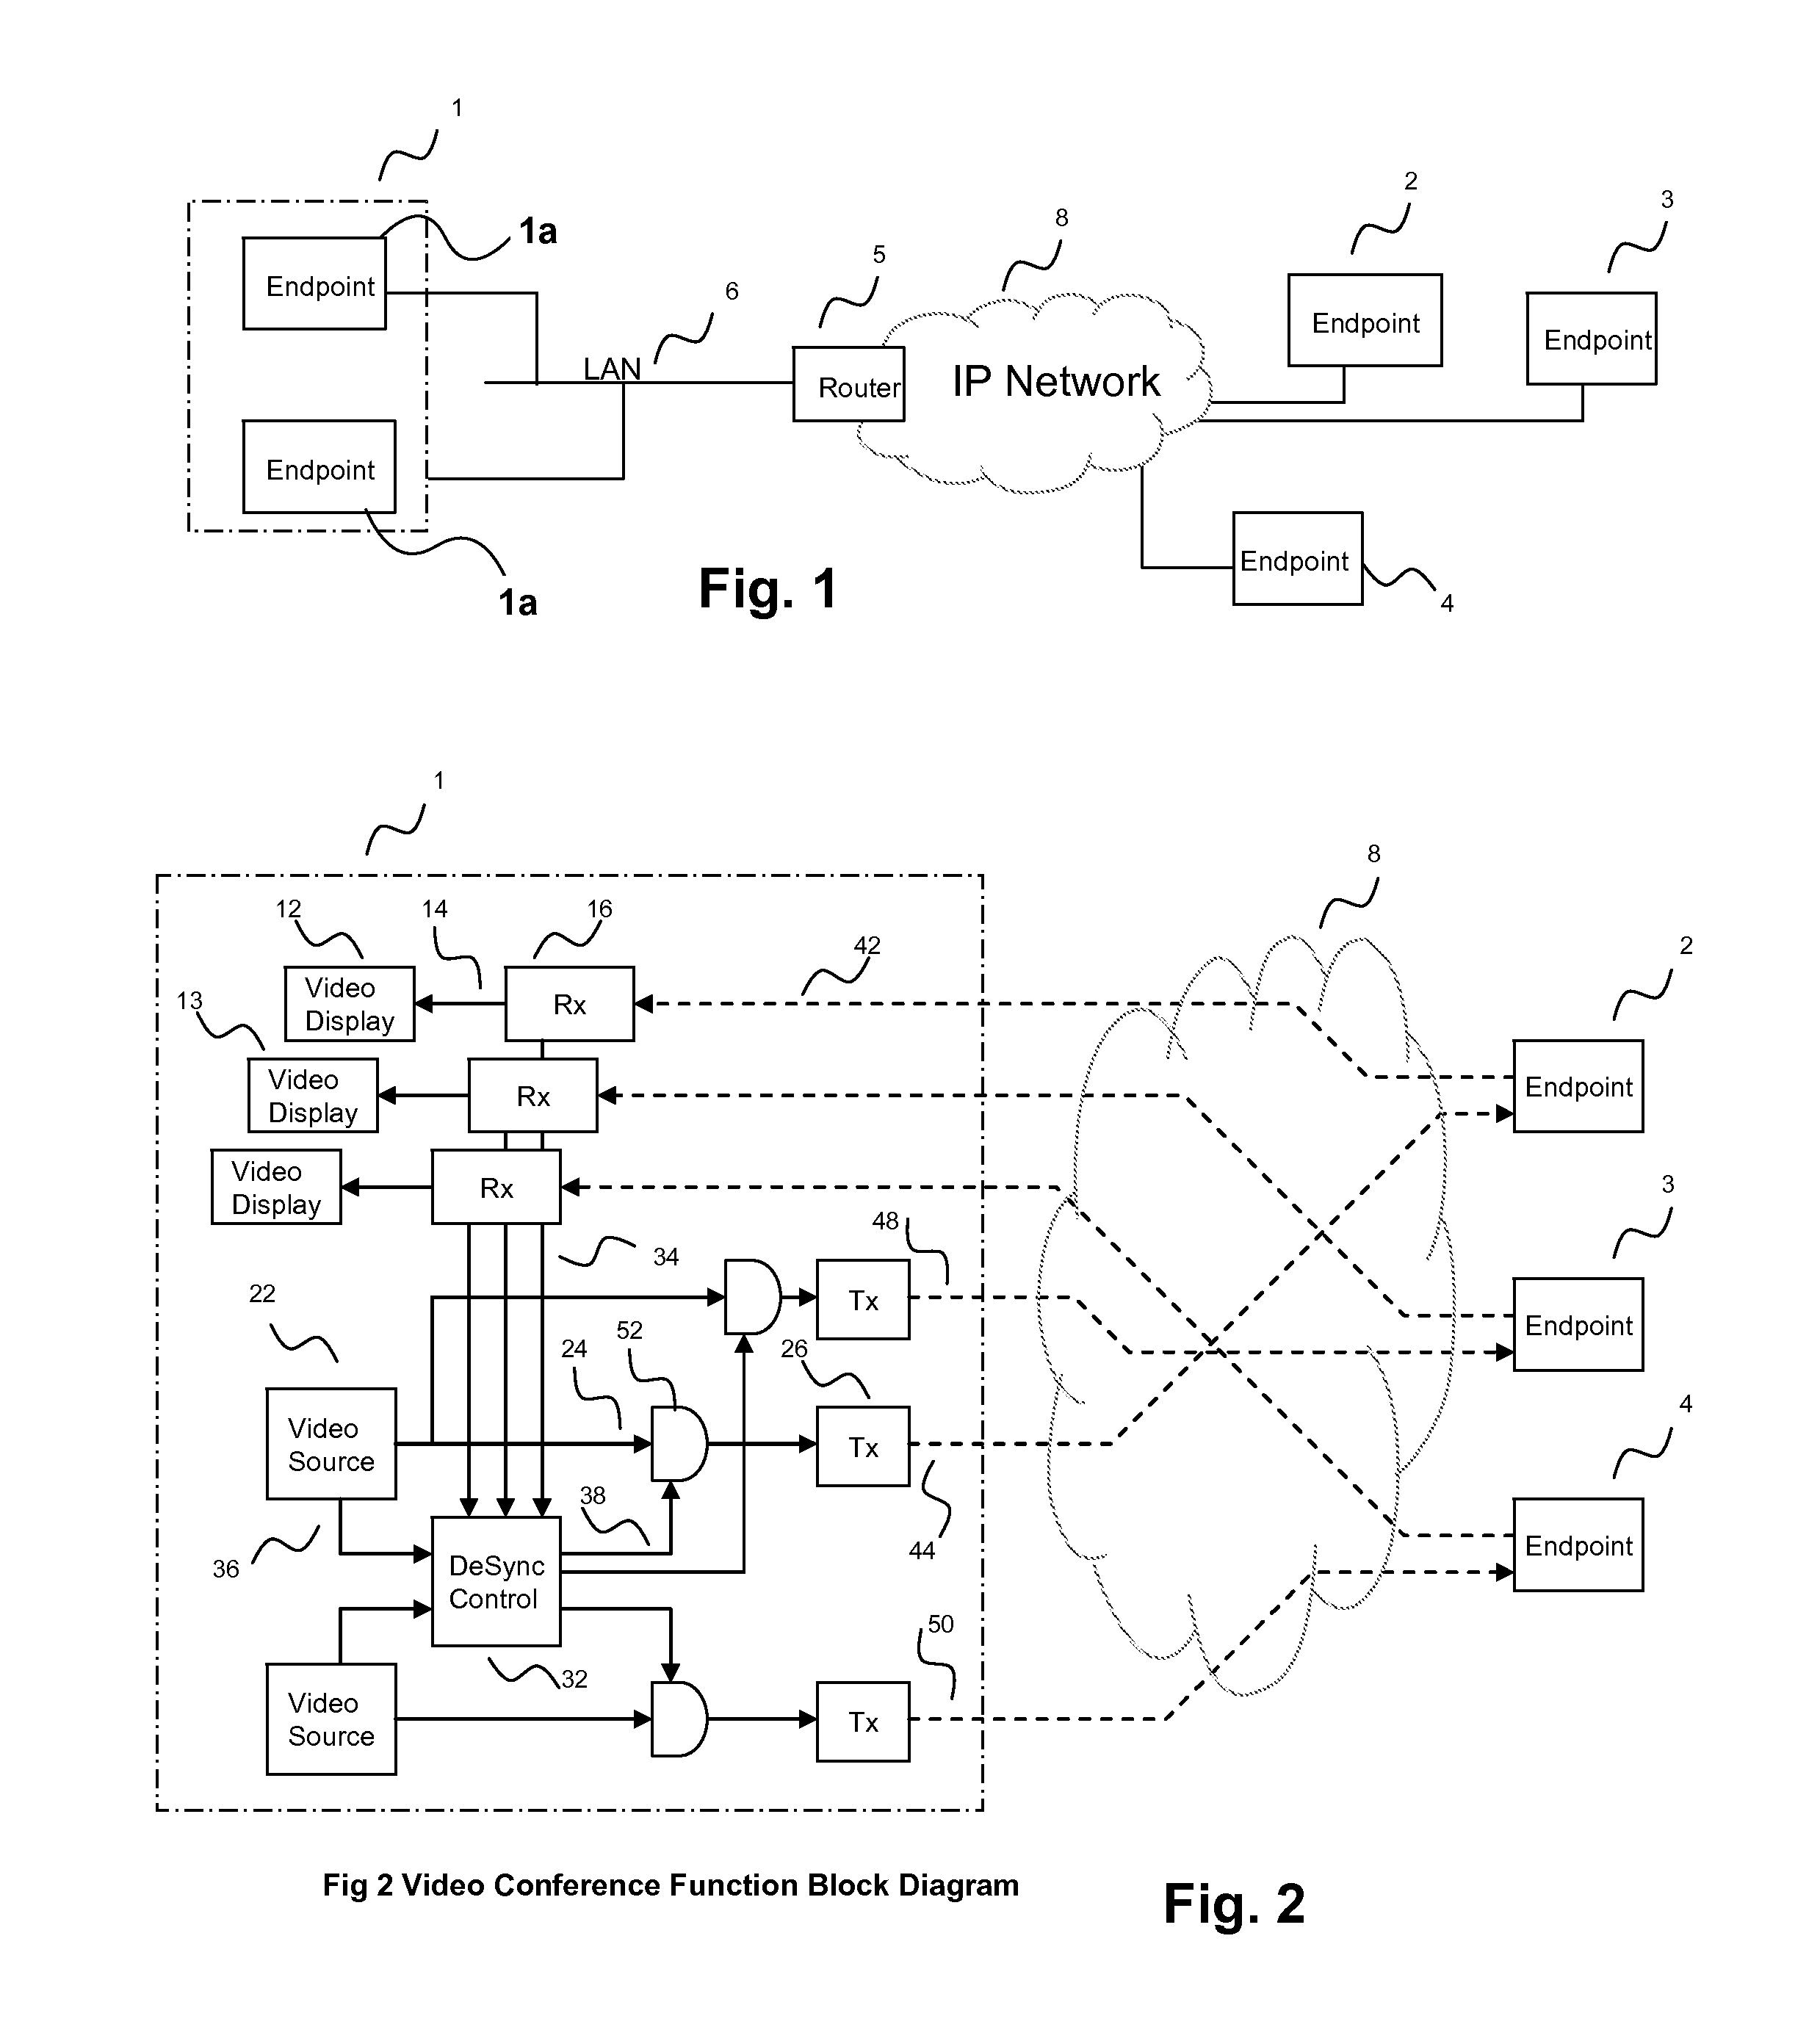 Method Of Managing The Flow Of Time-Sensitive Data Over Packet Networks